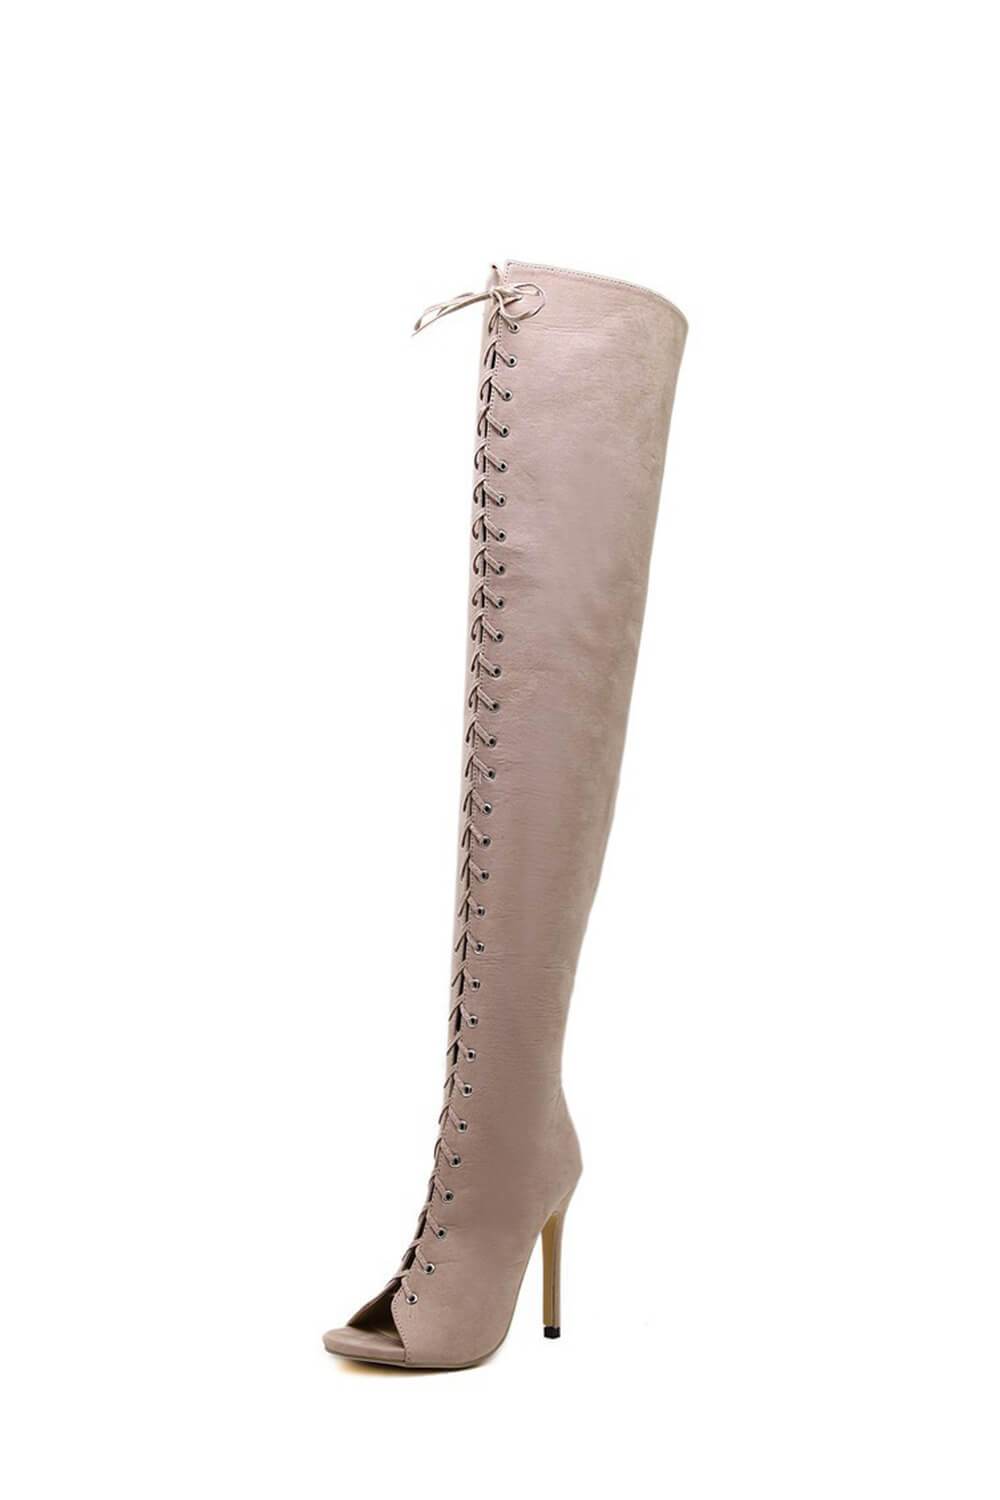 Nude Suede Lace Up Peep Toe Thigh High Boots